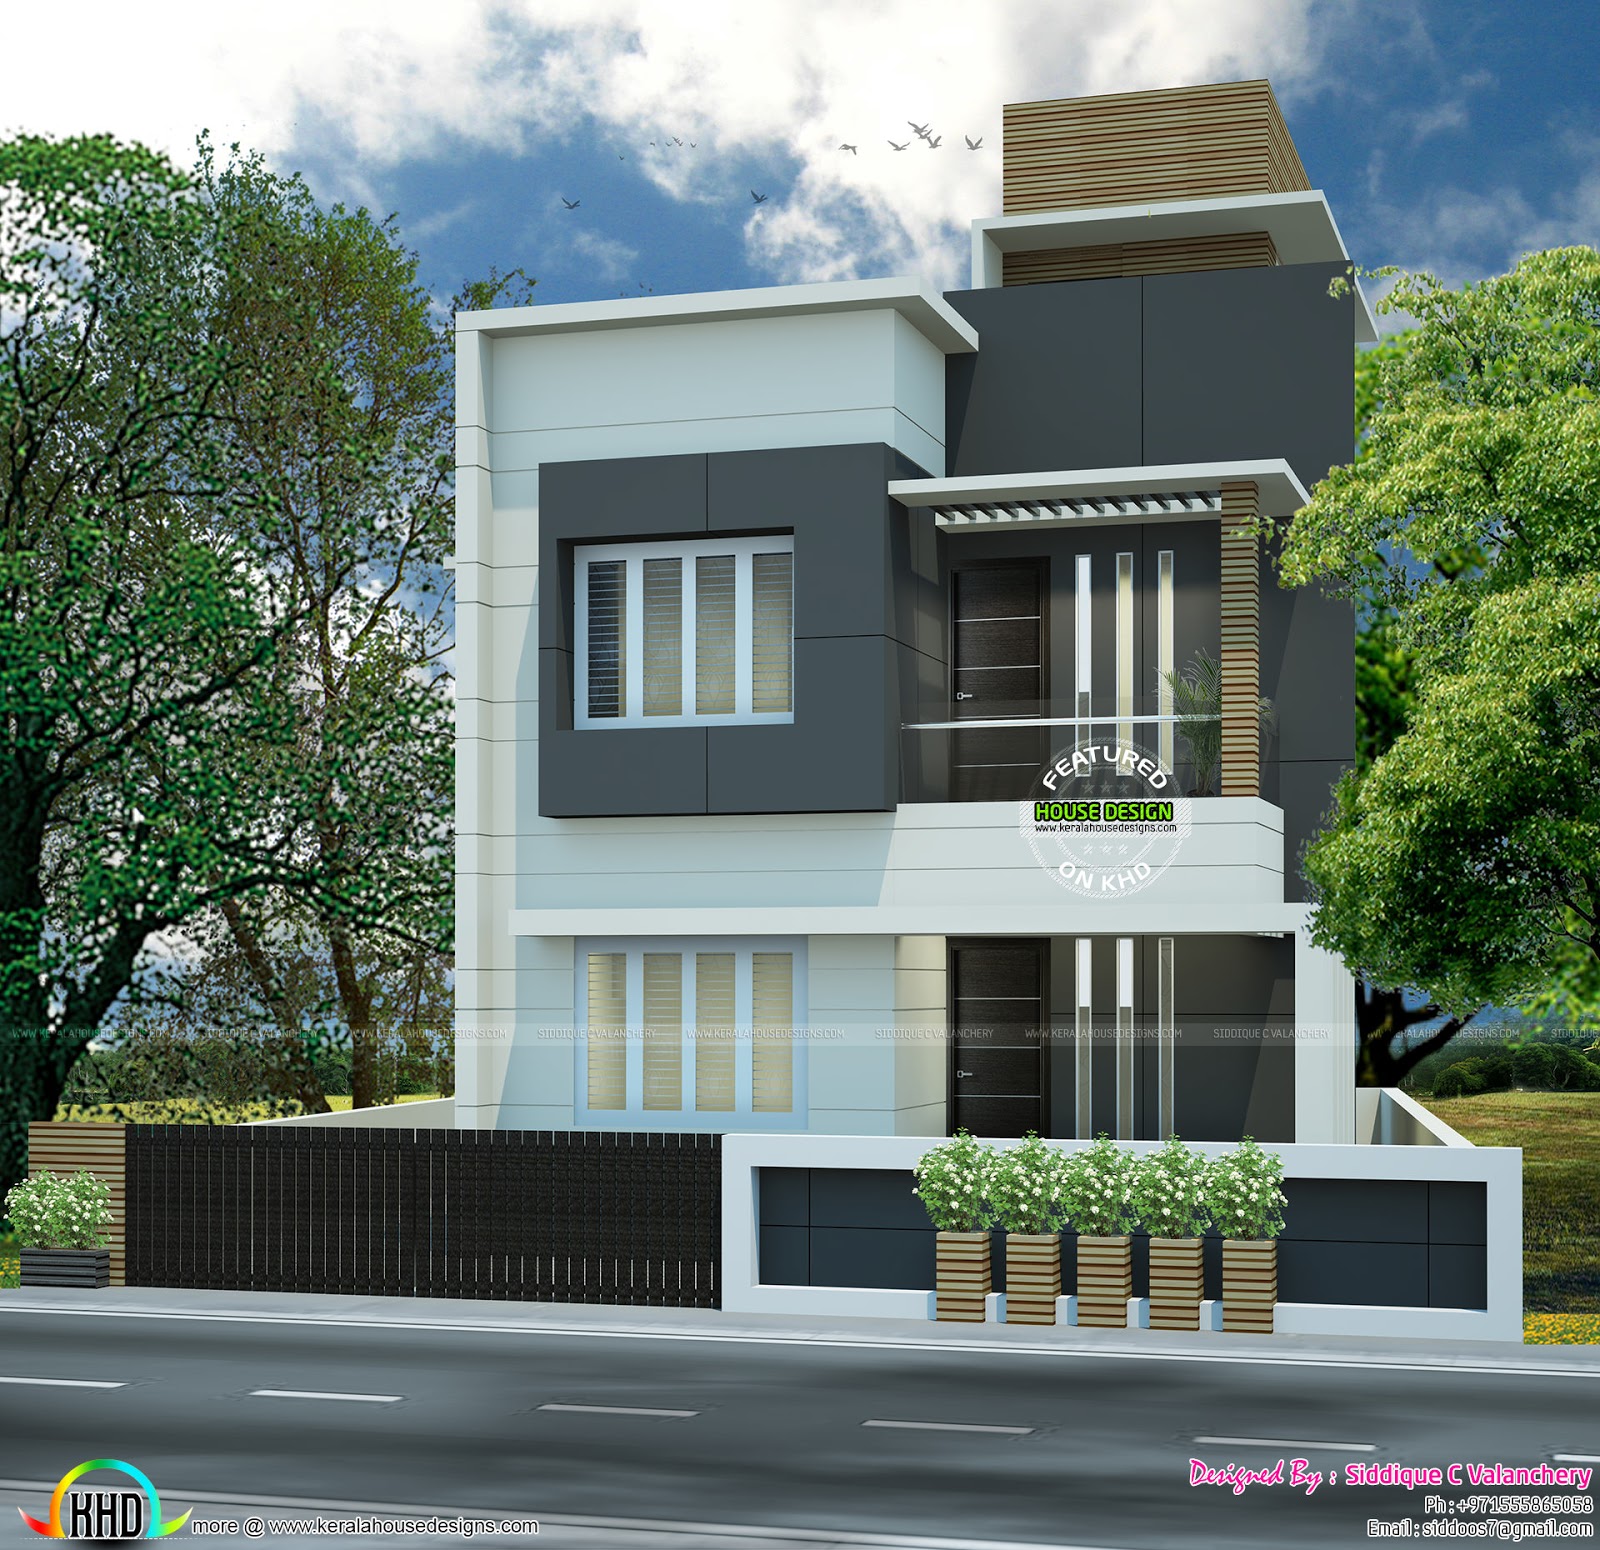  Small  plot  flat roof house  Kerala  home  design  and floor 